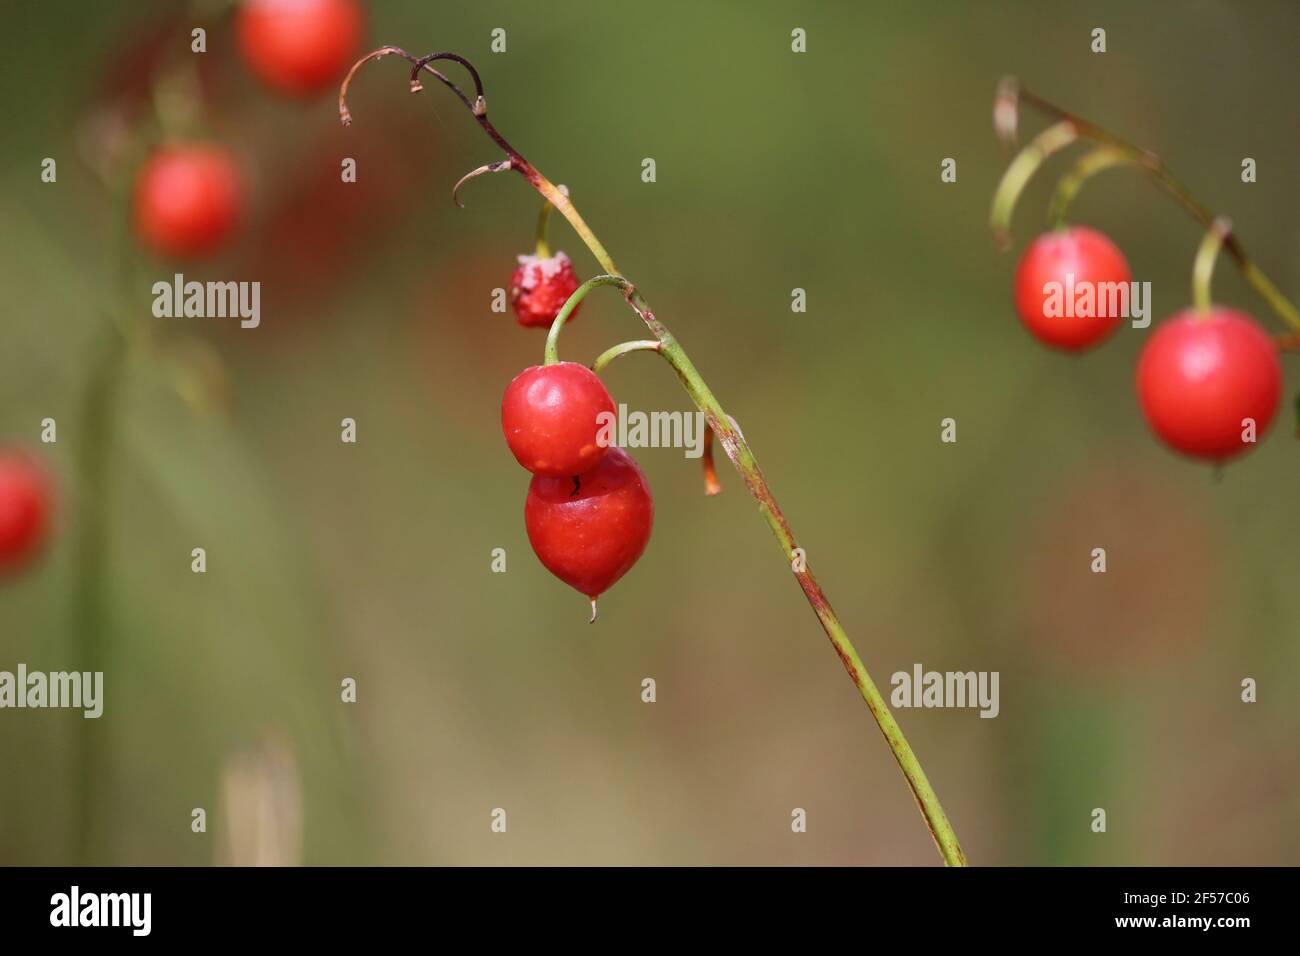 Orange fruit of lily of the valley on a green stem in the forest.  Red berries of lily of the valley on a green background outdoors. Stock Photo